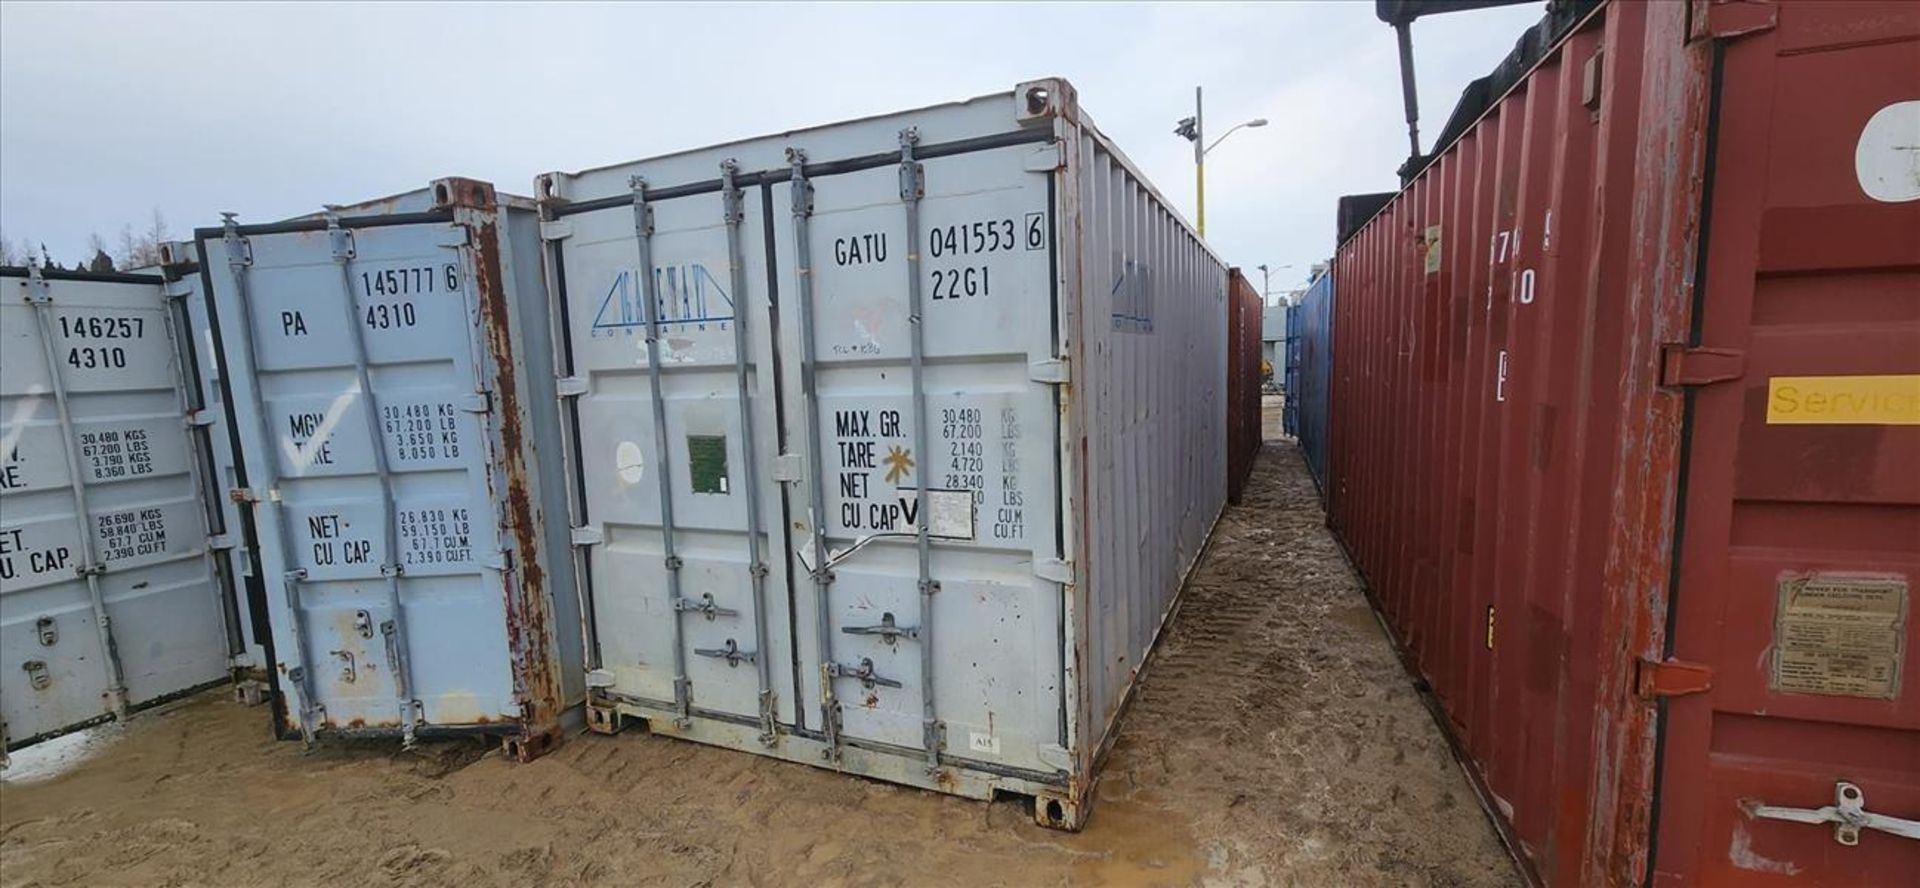 sea container, 20 ft. c/w contents: shelving, spare Caterpillar parts, etc. (Asset Location: Hallnor - Image 3 of 3